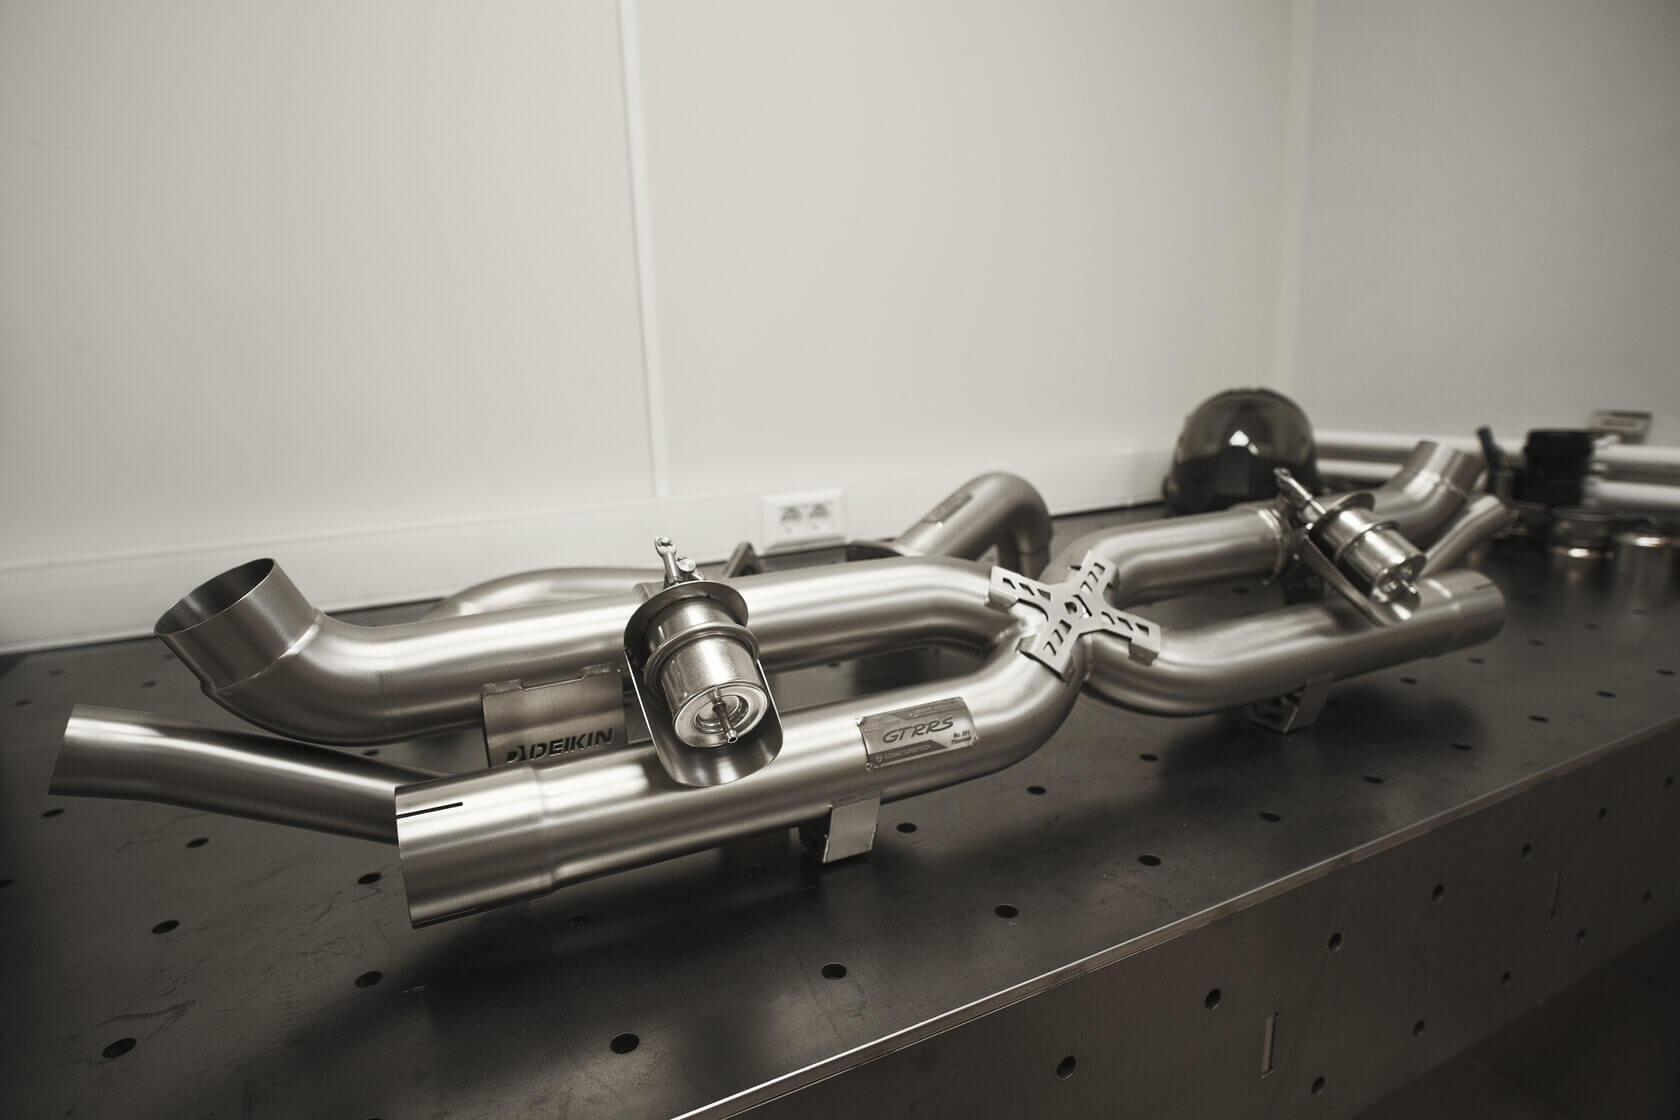 DEIKIN 10-PO.911.T/TS.991.2/R-ES-Ti-00 Exhaust system "Race" Titan for Porsche 911 Turbo/Turbo S (991.2) complete with downpipes without HeatShield Photo-5 